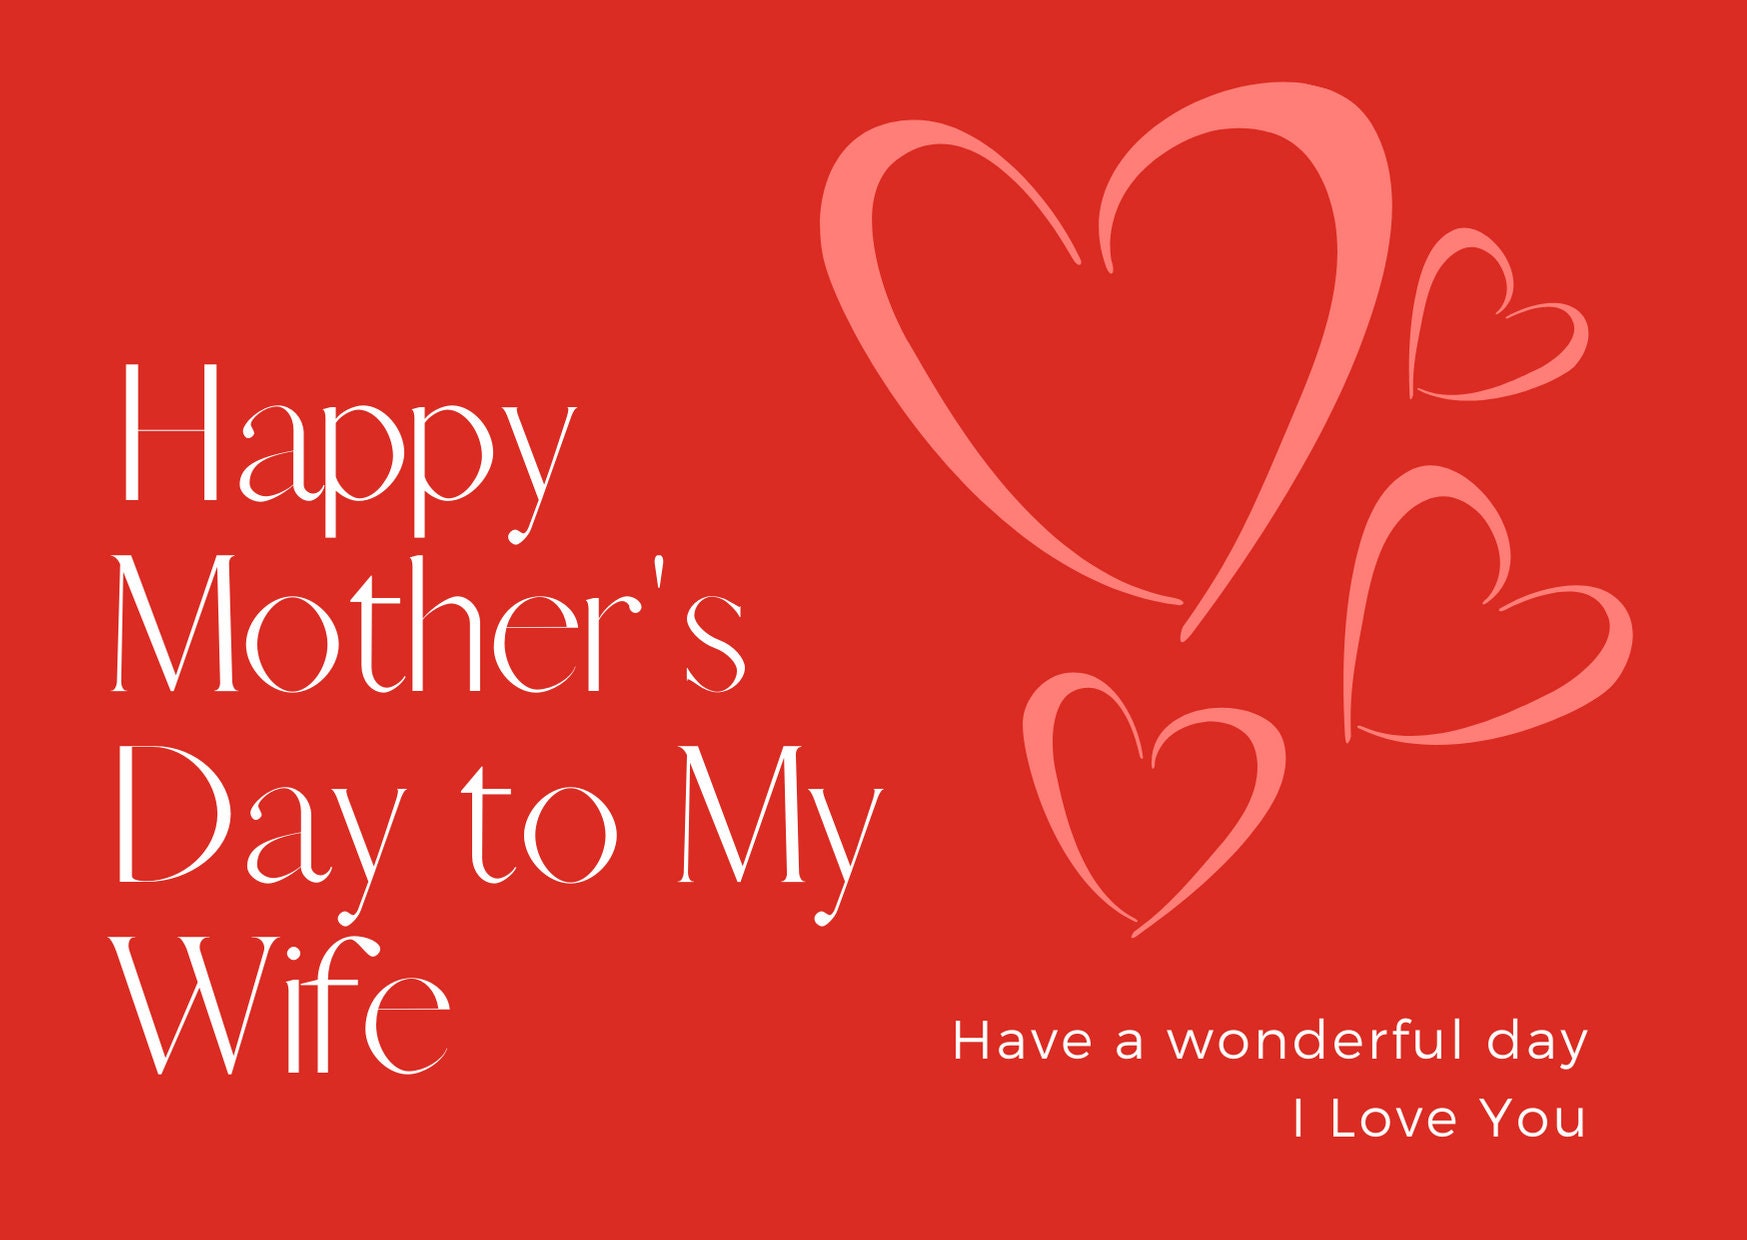 printable-mothers-day-card-for-wife-red-with-hearts-etsy-uk